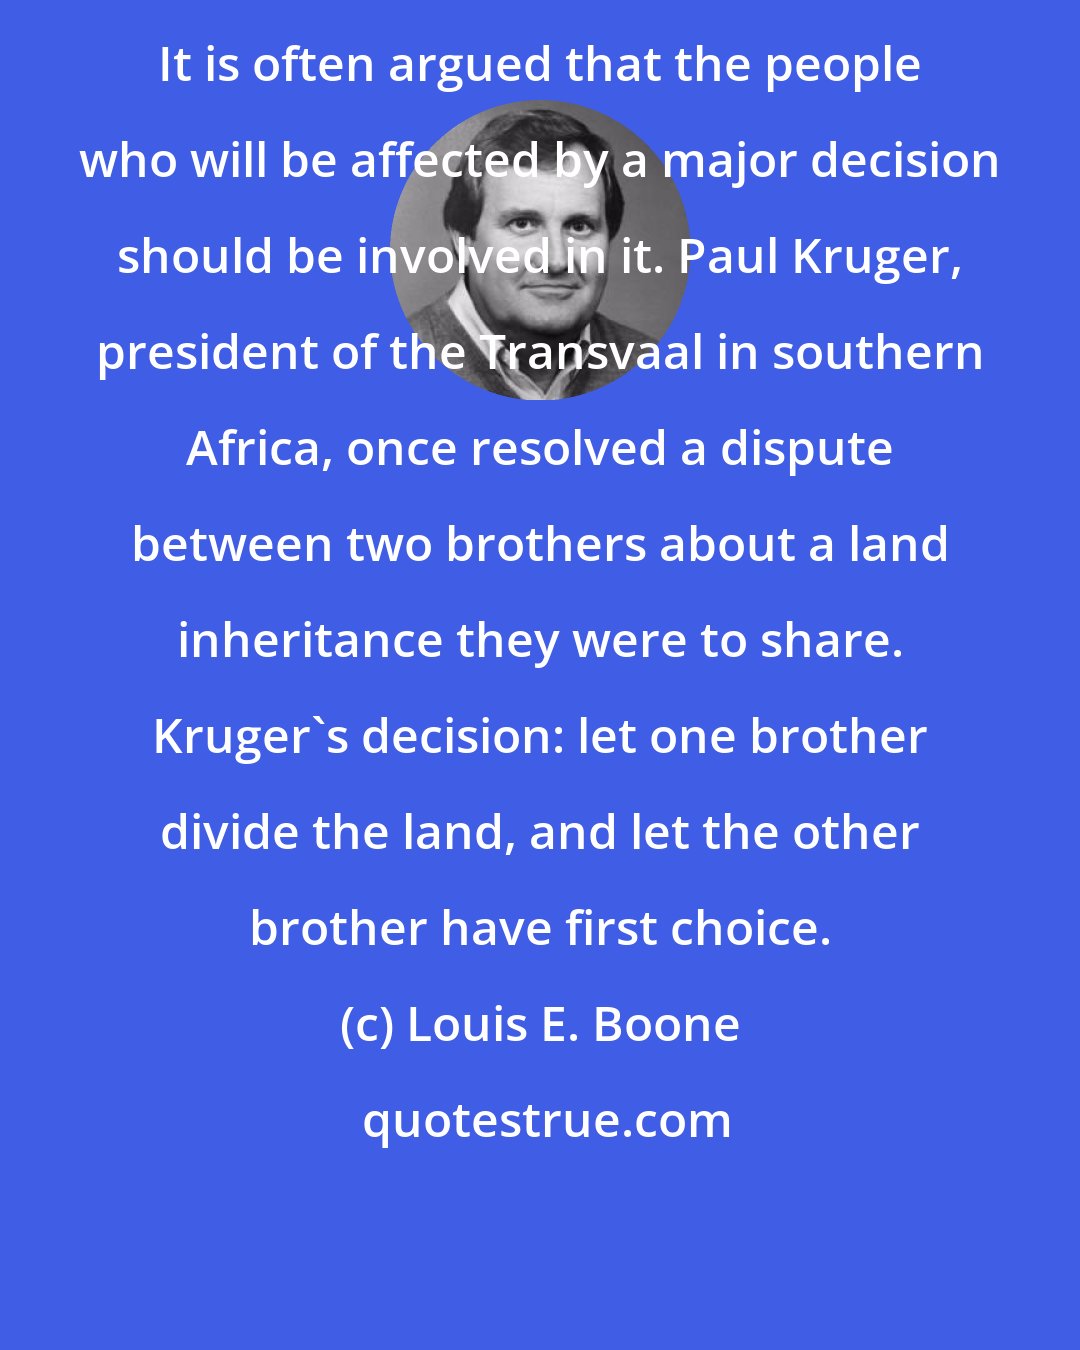 Louis E. Boone: It is often argued that the people who will be affected by a major decision should be involved in it. Paul Kruger, president of the Transvaal in southern Africa, once resolved a dispute between two brothers about a land inheritance they were to share. Kruger's decision: let one brother divide the land, and let the other brother have first choice.